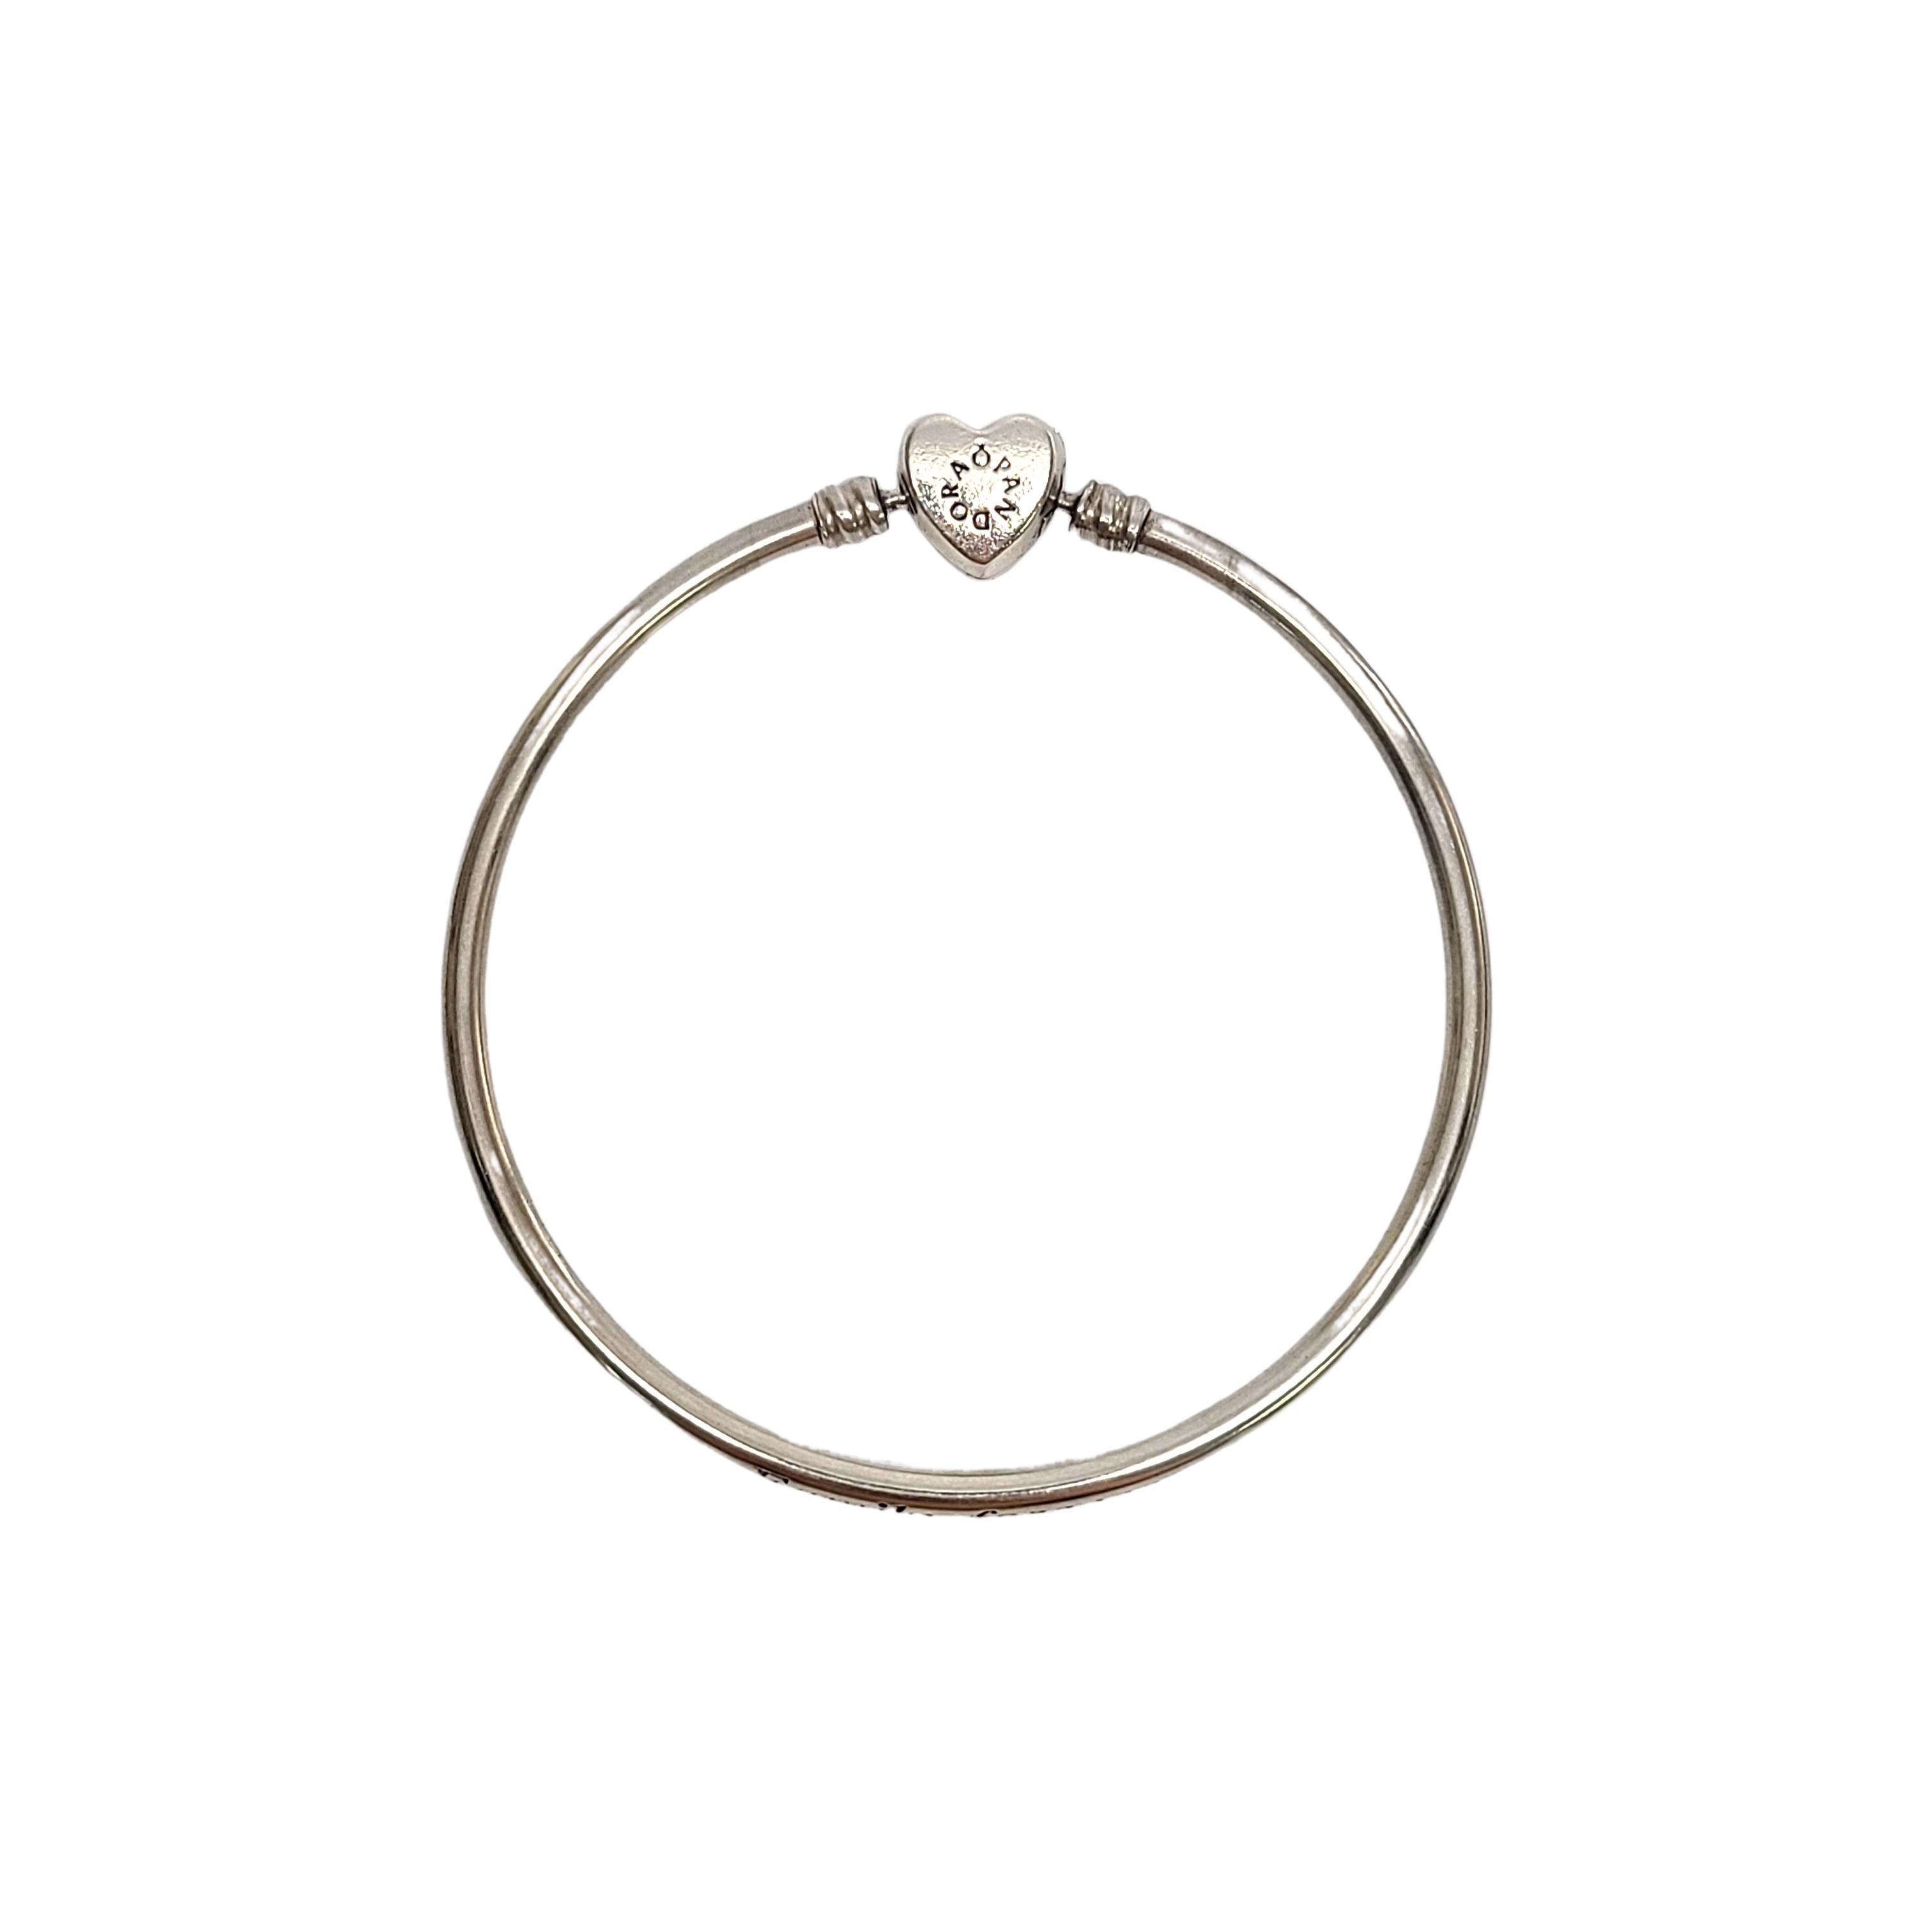 Pandora Wishful Heart Family Forever sterling silver bangle bracelet with CZ heart closure.

#590729CZ

This lovely Pandora bangle bracelet features a CZ heart clasp. 